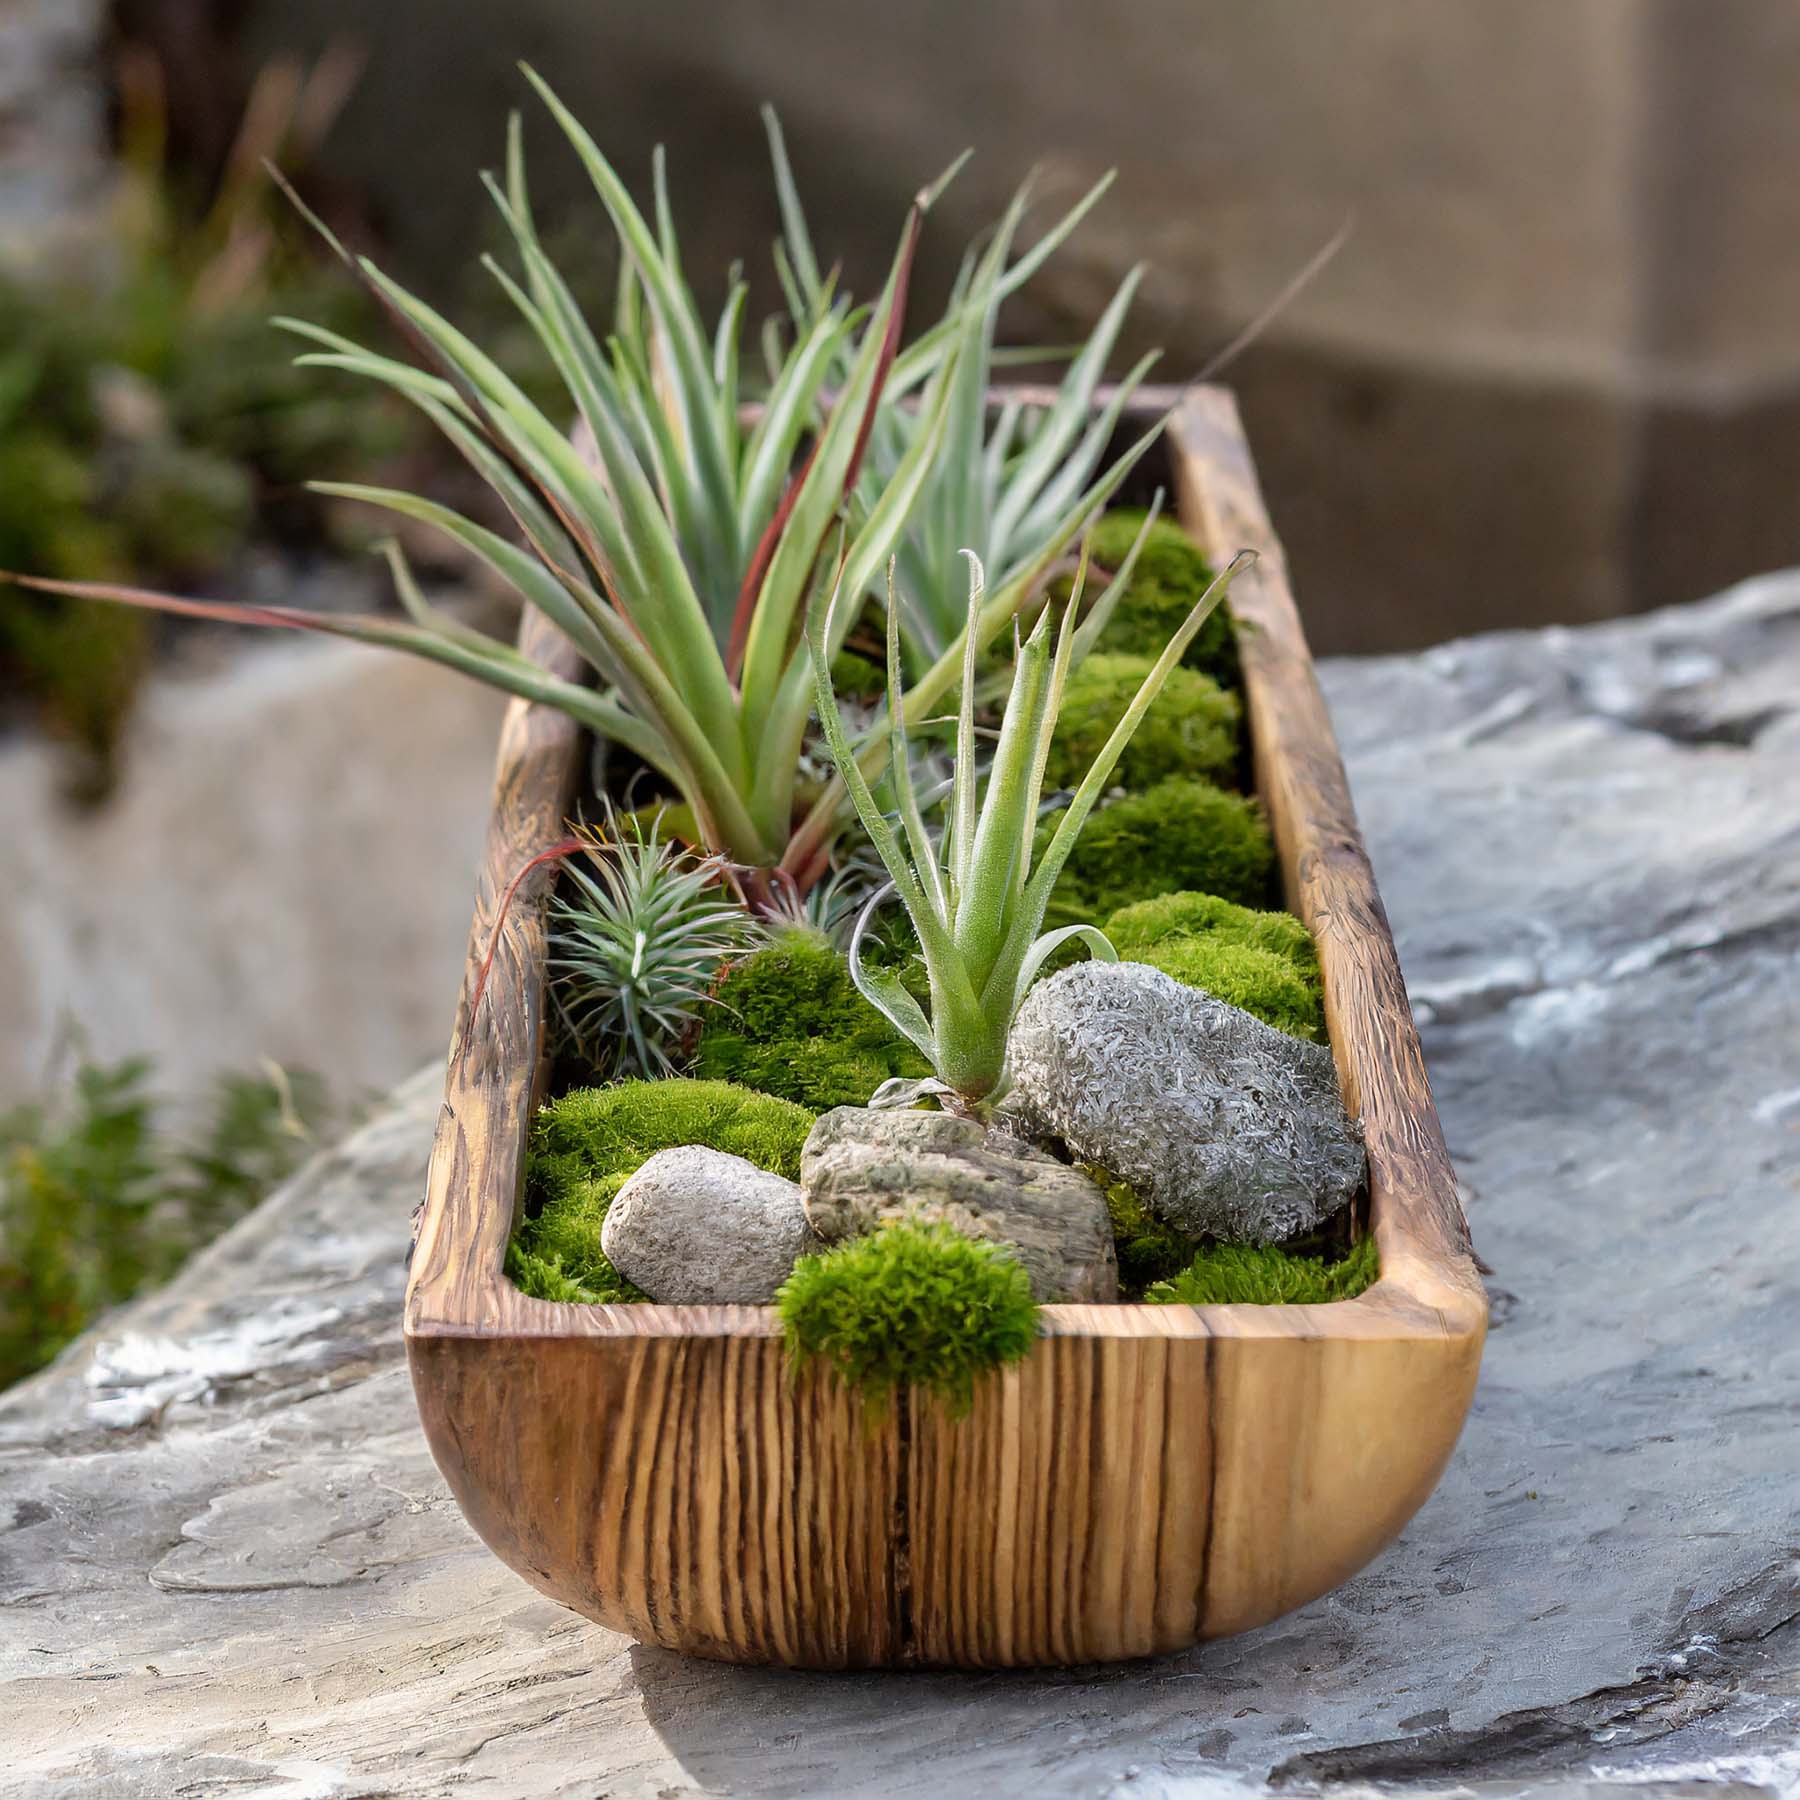 Wooden dough bowl trough filled with air plants, rocks, and moss.